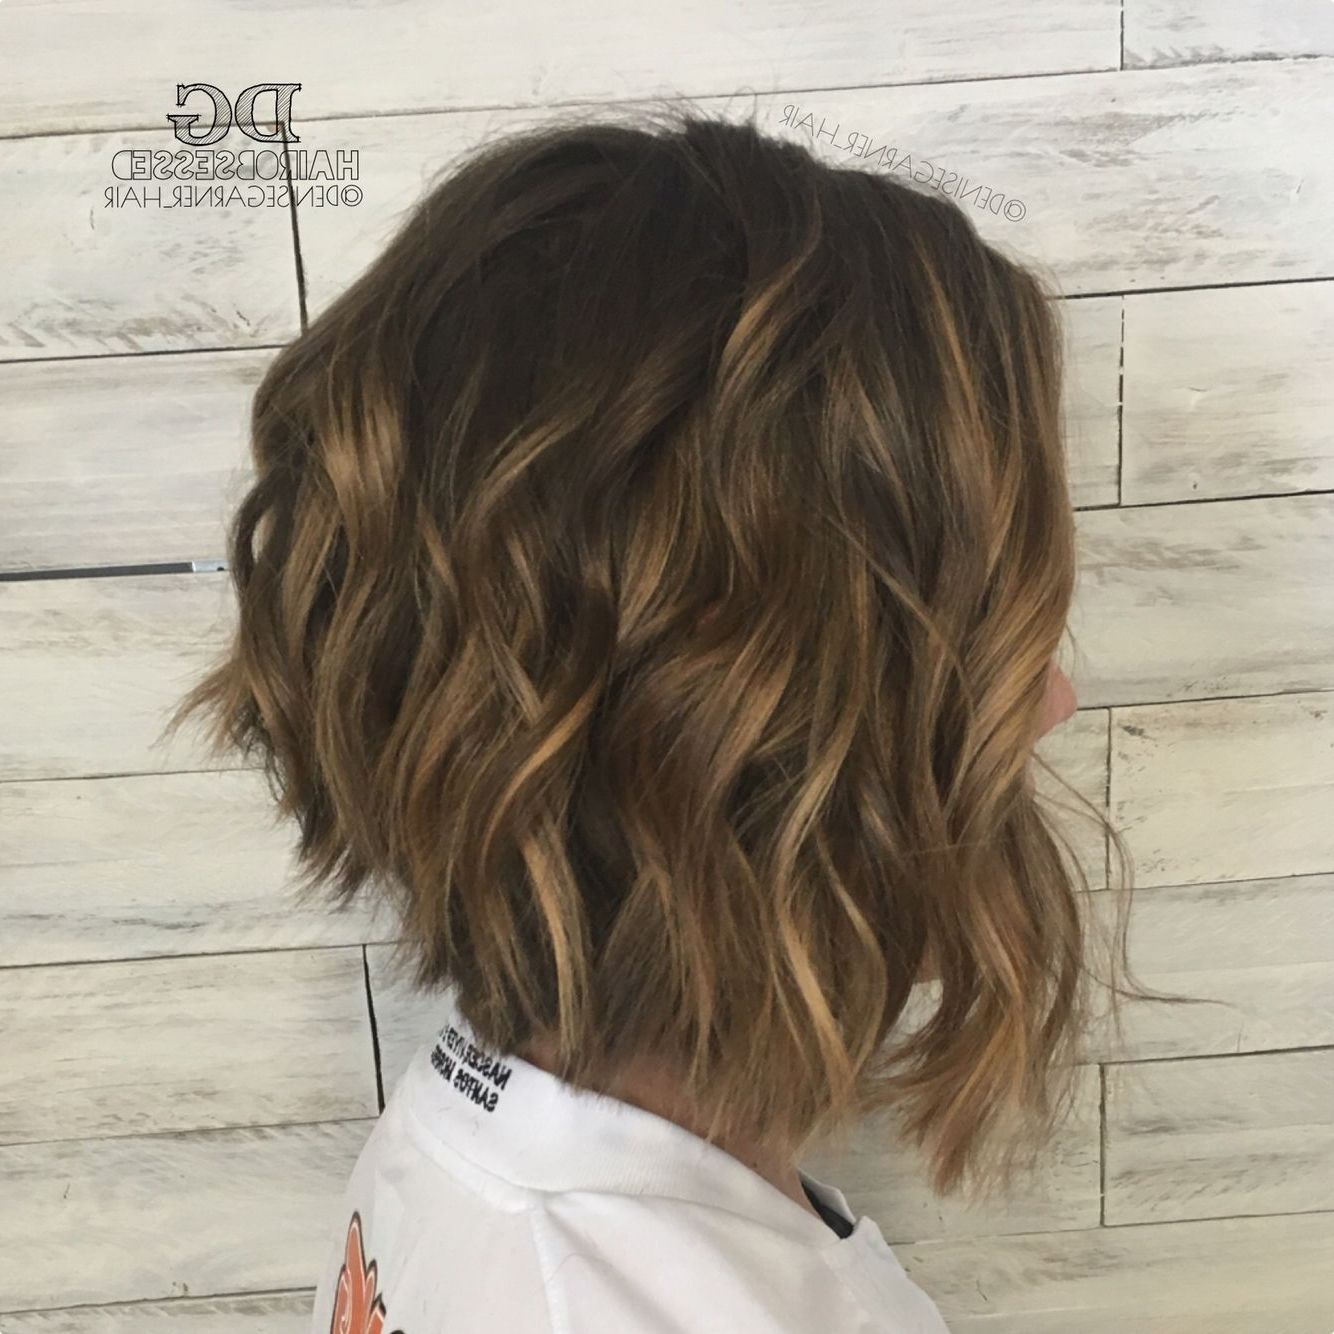 A Line Cut With Balayage, Balayage, Balayage Short Hair, Short Hair Inside Most Popular Piece Y Pixie Haircuts With Subtle Balayage (View 6 of 20)